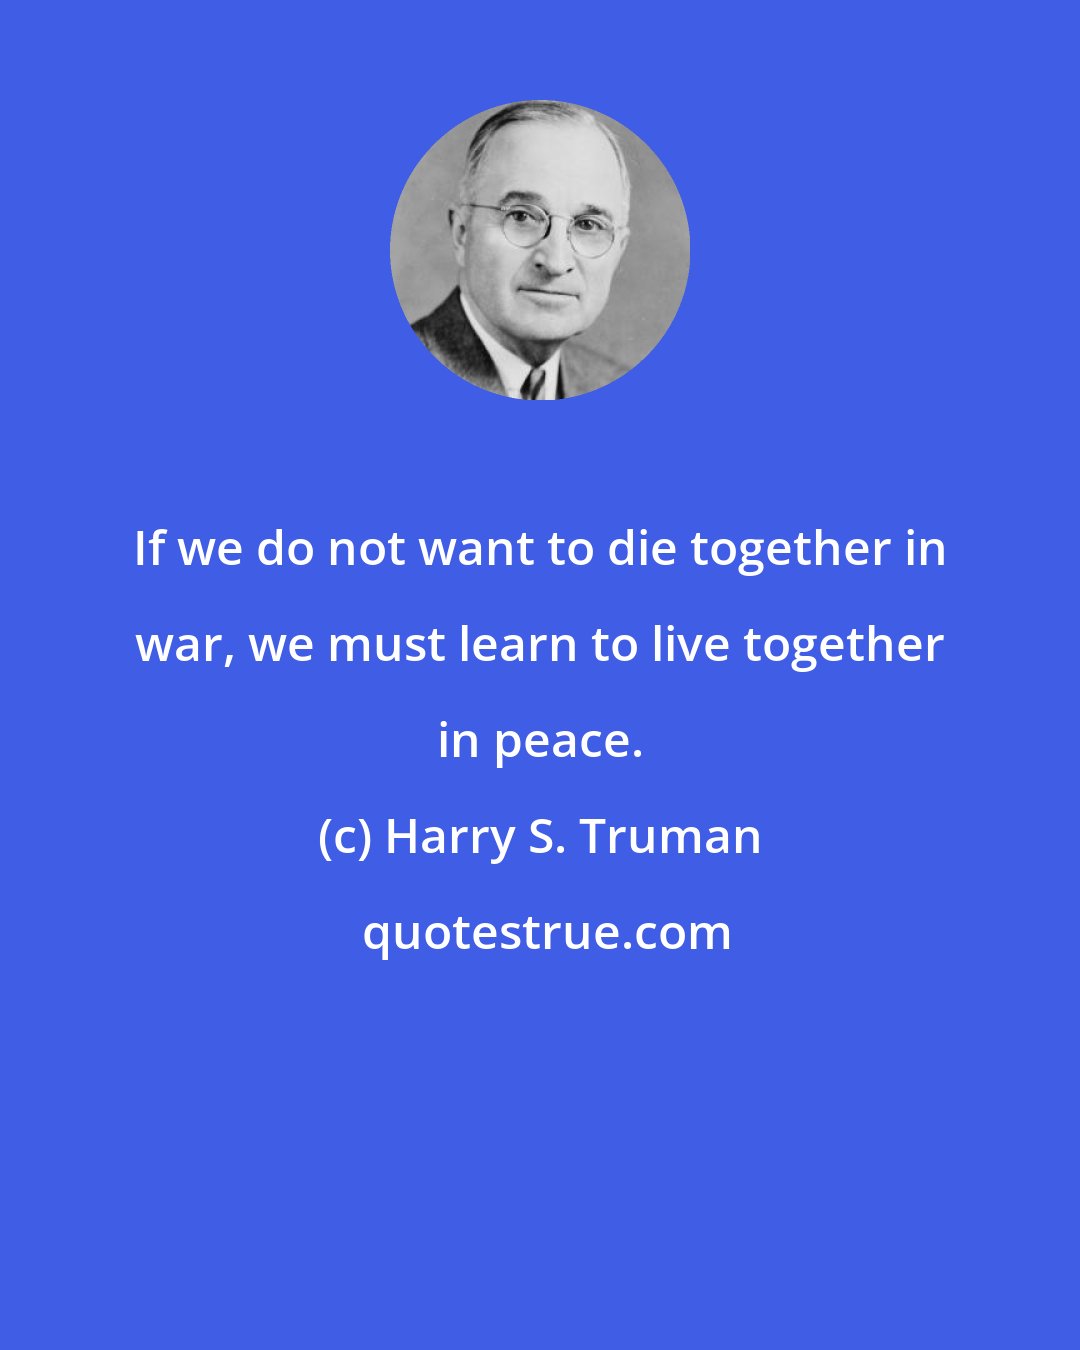 Harry S. Truman: If we do not want to die together in war, we must learn to live together in peace.